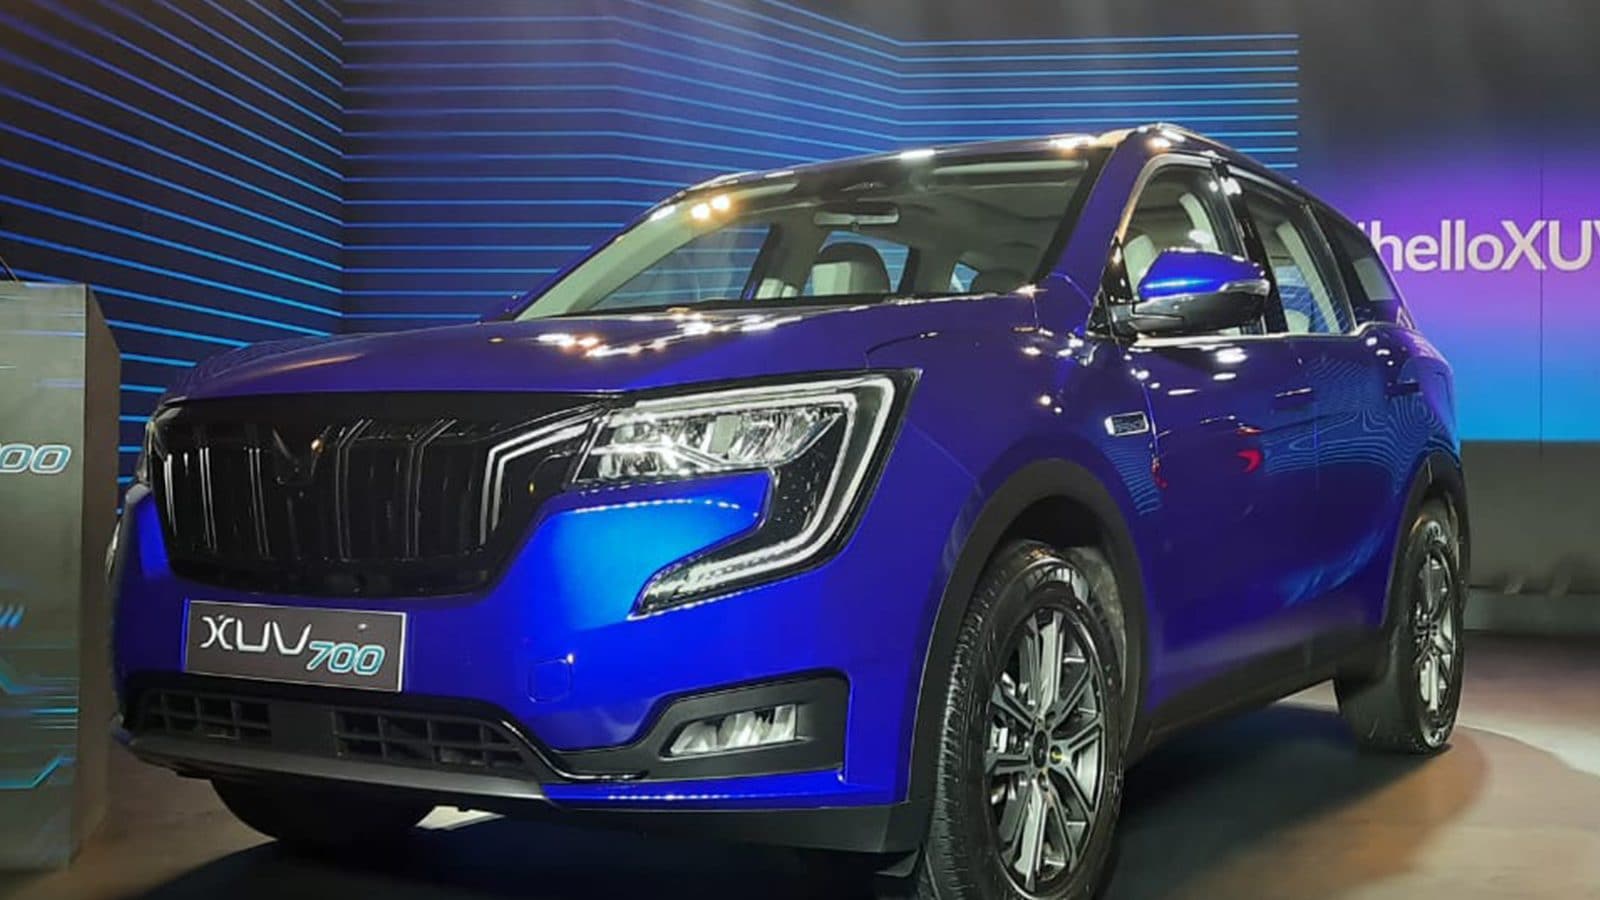 Mahindra XUV700 SUV Launched in India, Price Starts at Rs 11.99 Lakh